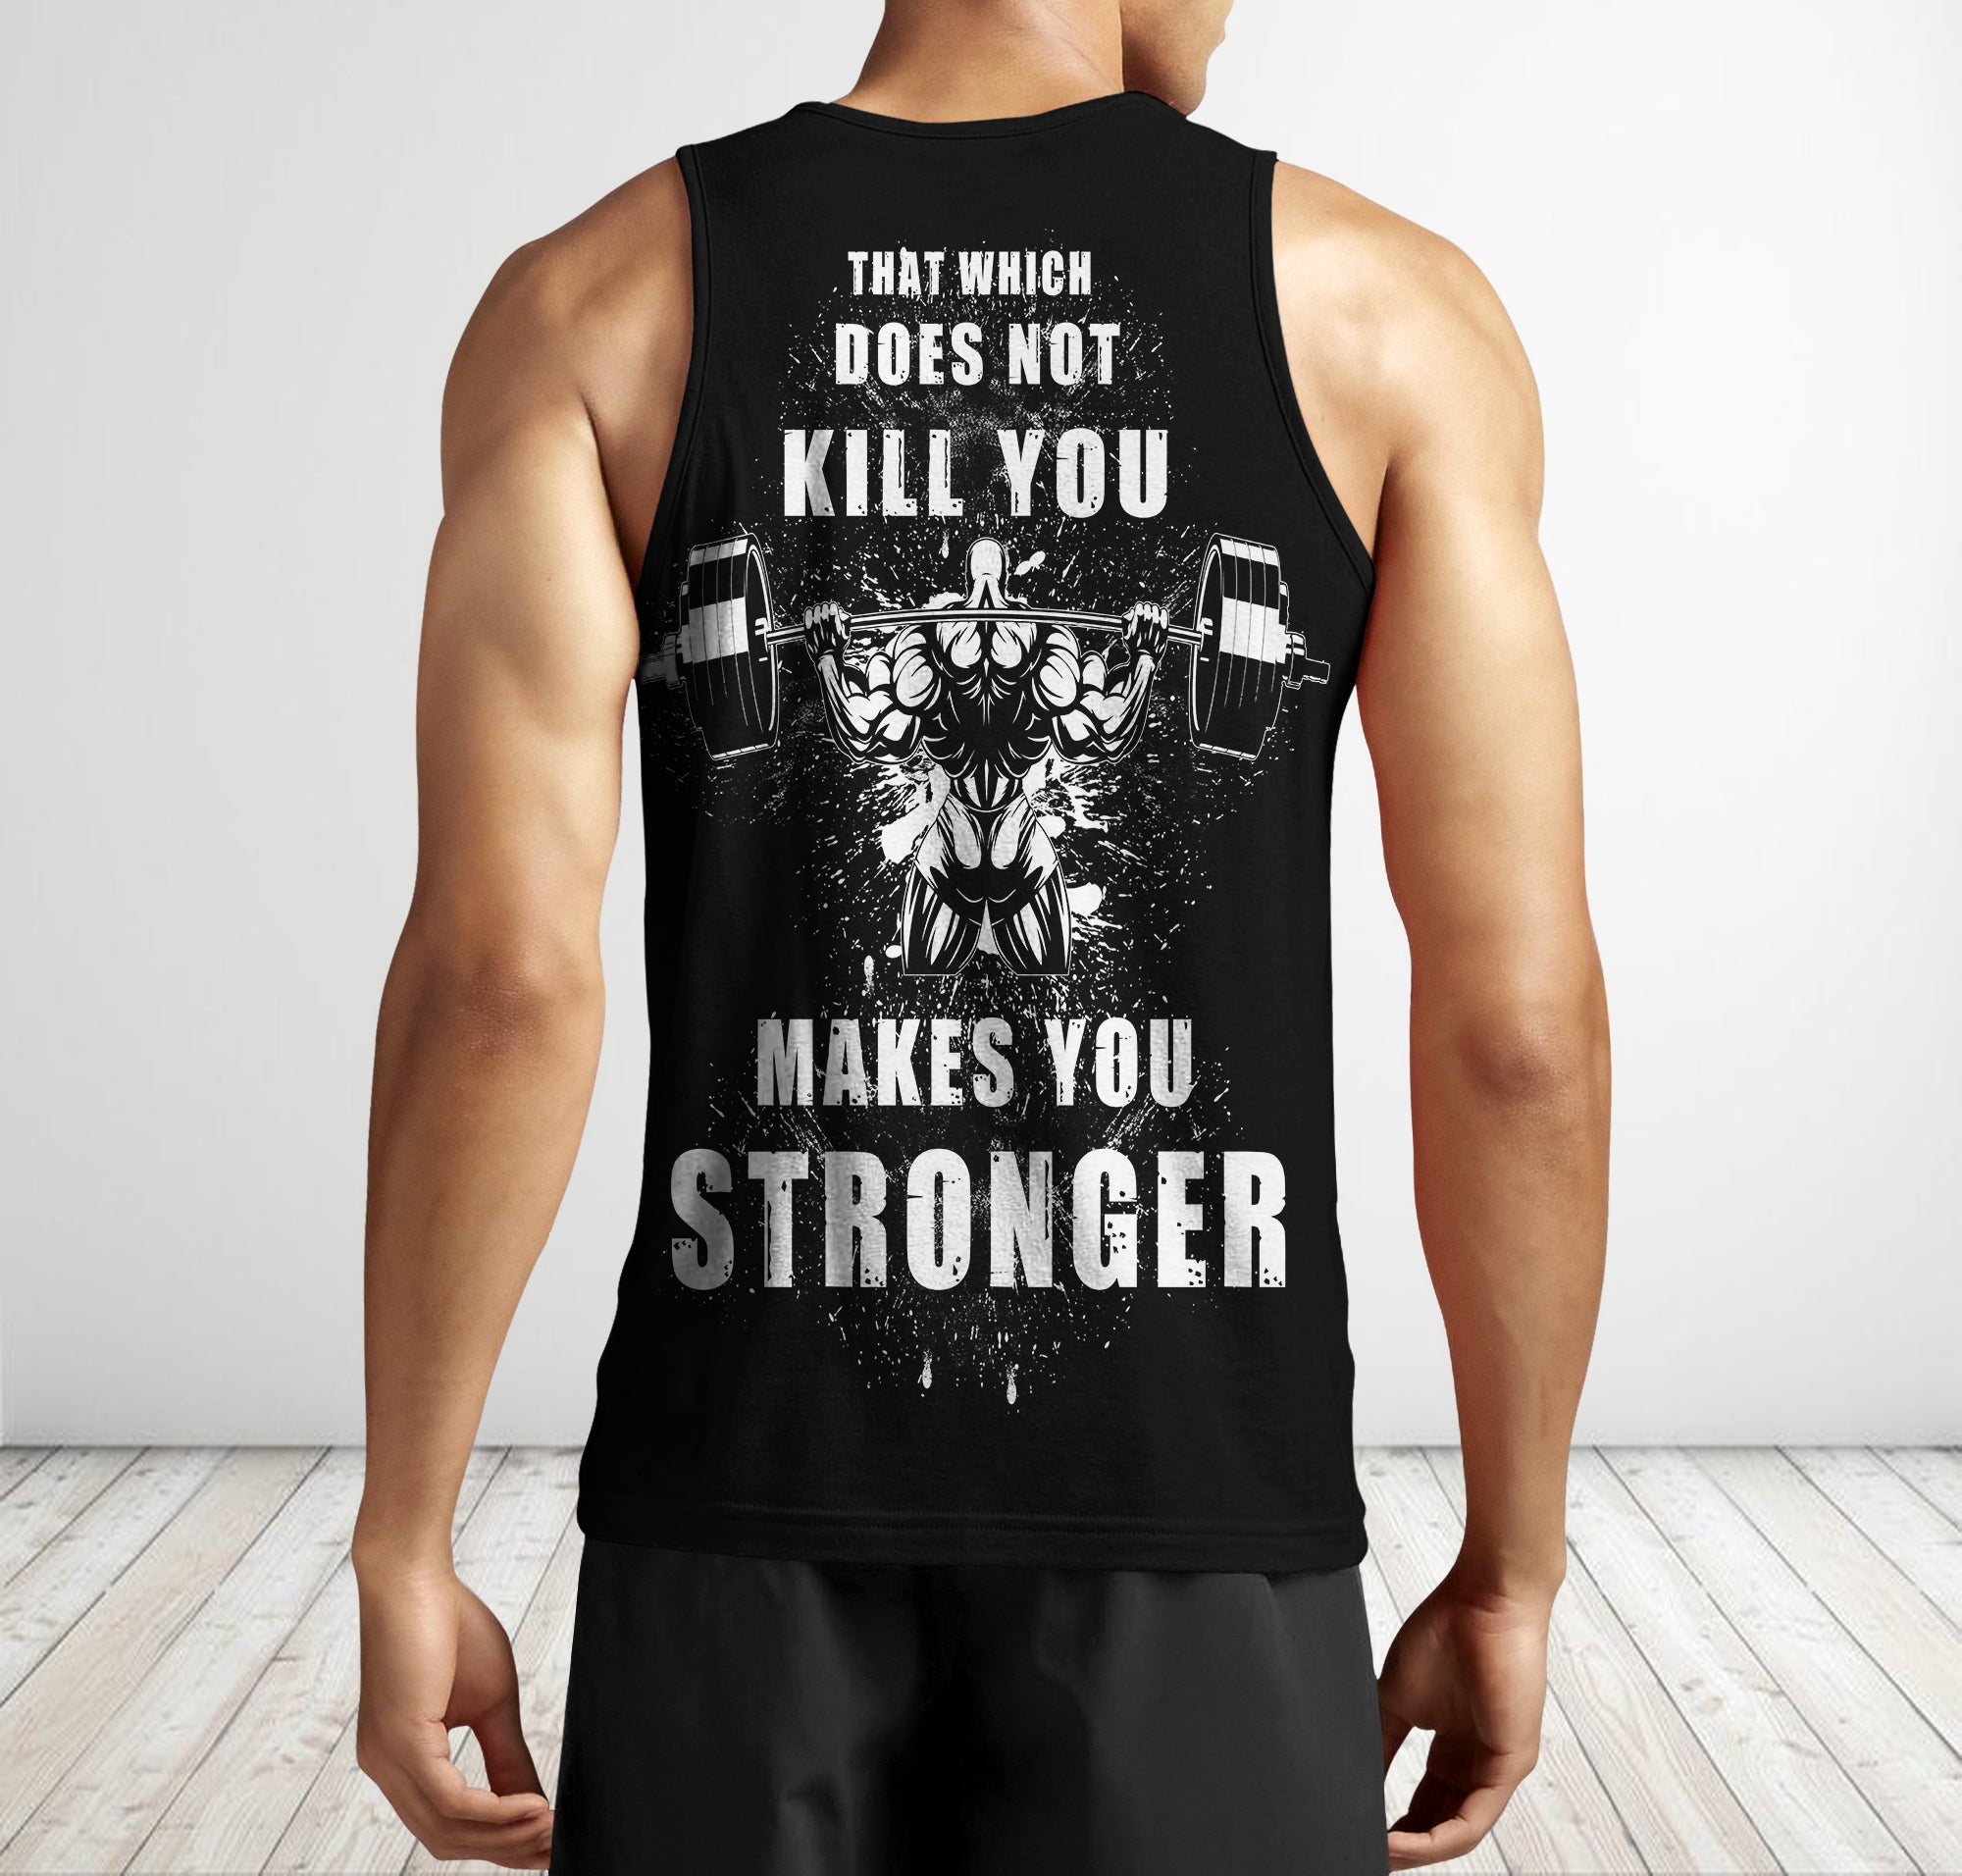 Gym Men Tank Tops Weightlifting Motivation Quotes Human Body